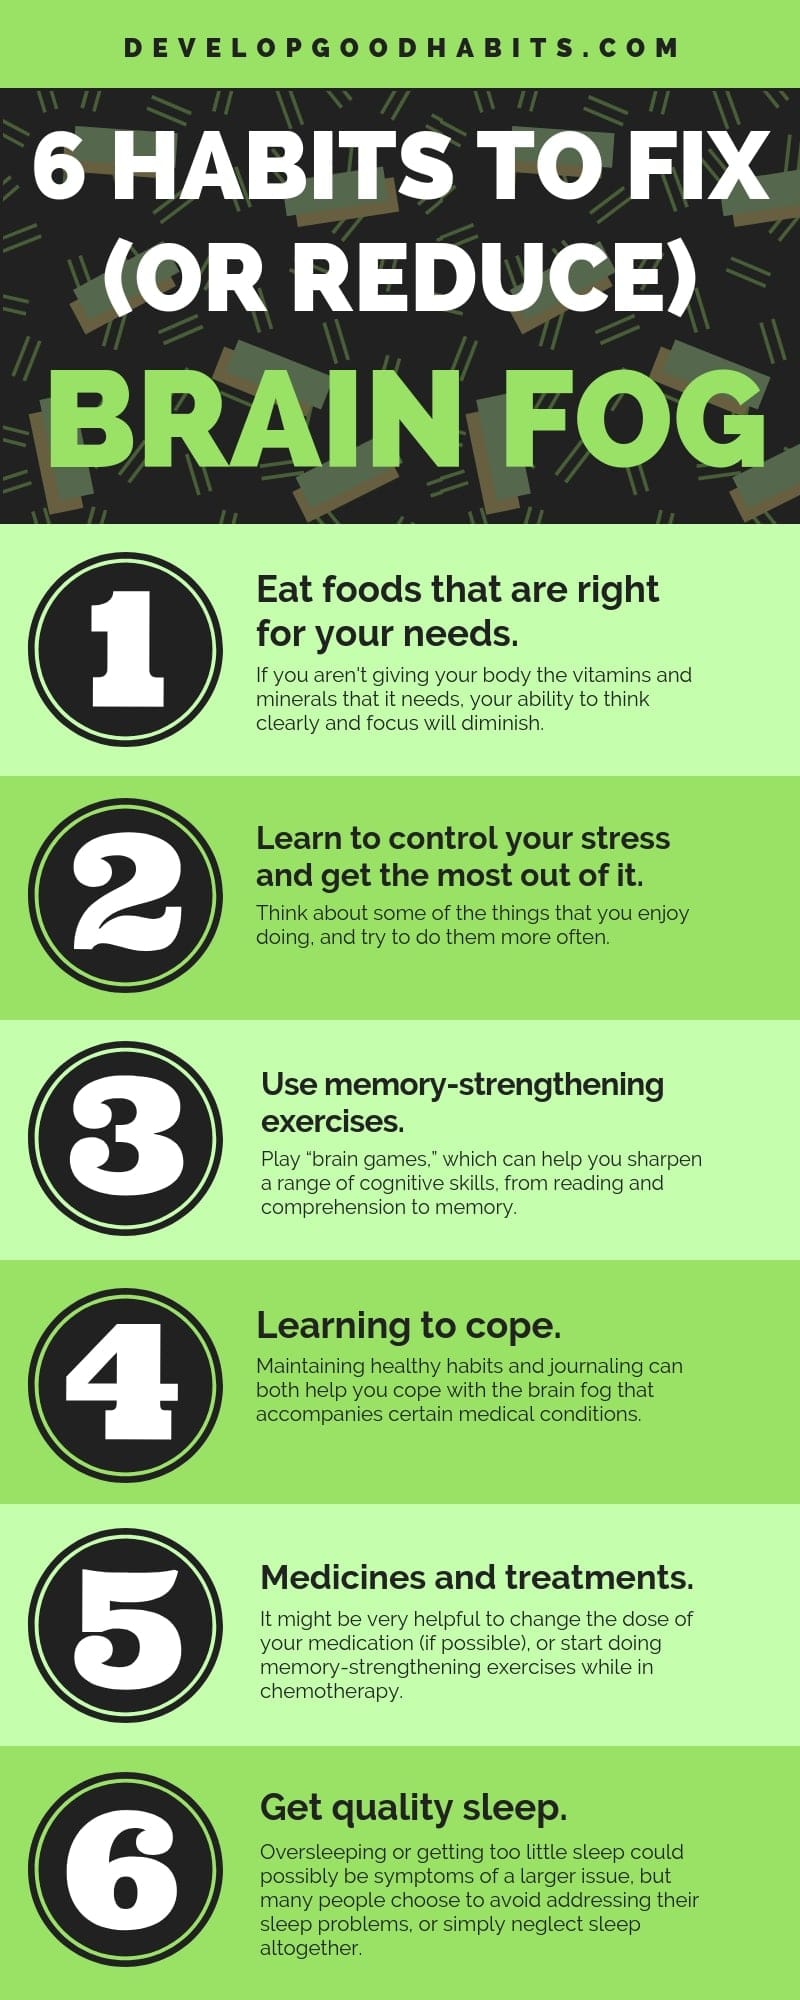 These are the six are things you can do to cope, prevent, or lessen the effects of brain fog. #infographic #productivity #learning #selfimprovement #selfcare #selfhelp #mentalhealth #habits #change #wellness